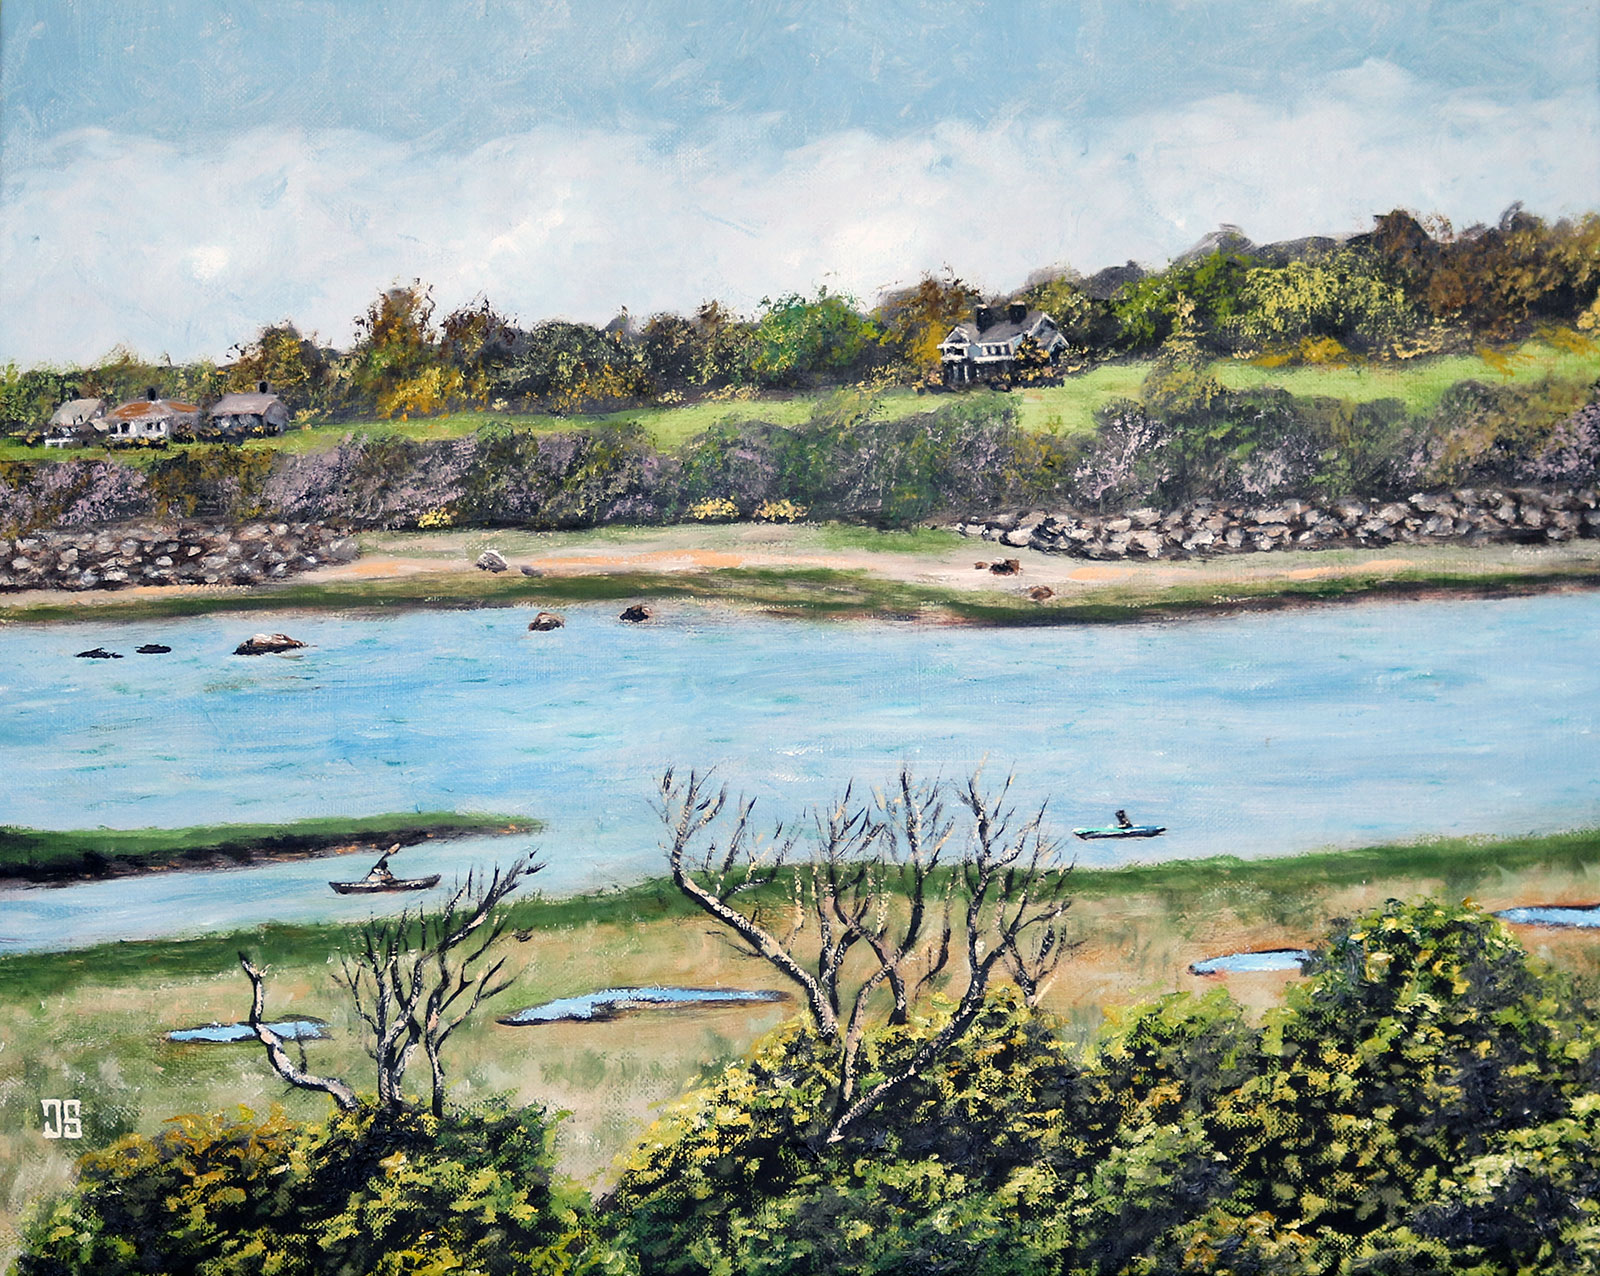 Oil painting "Kayakers in Eastham" by Jeffrey Dale Starr